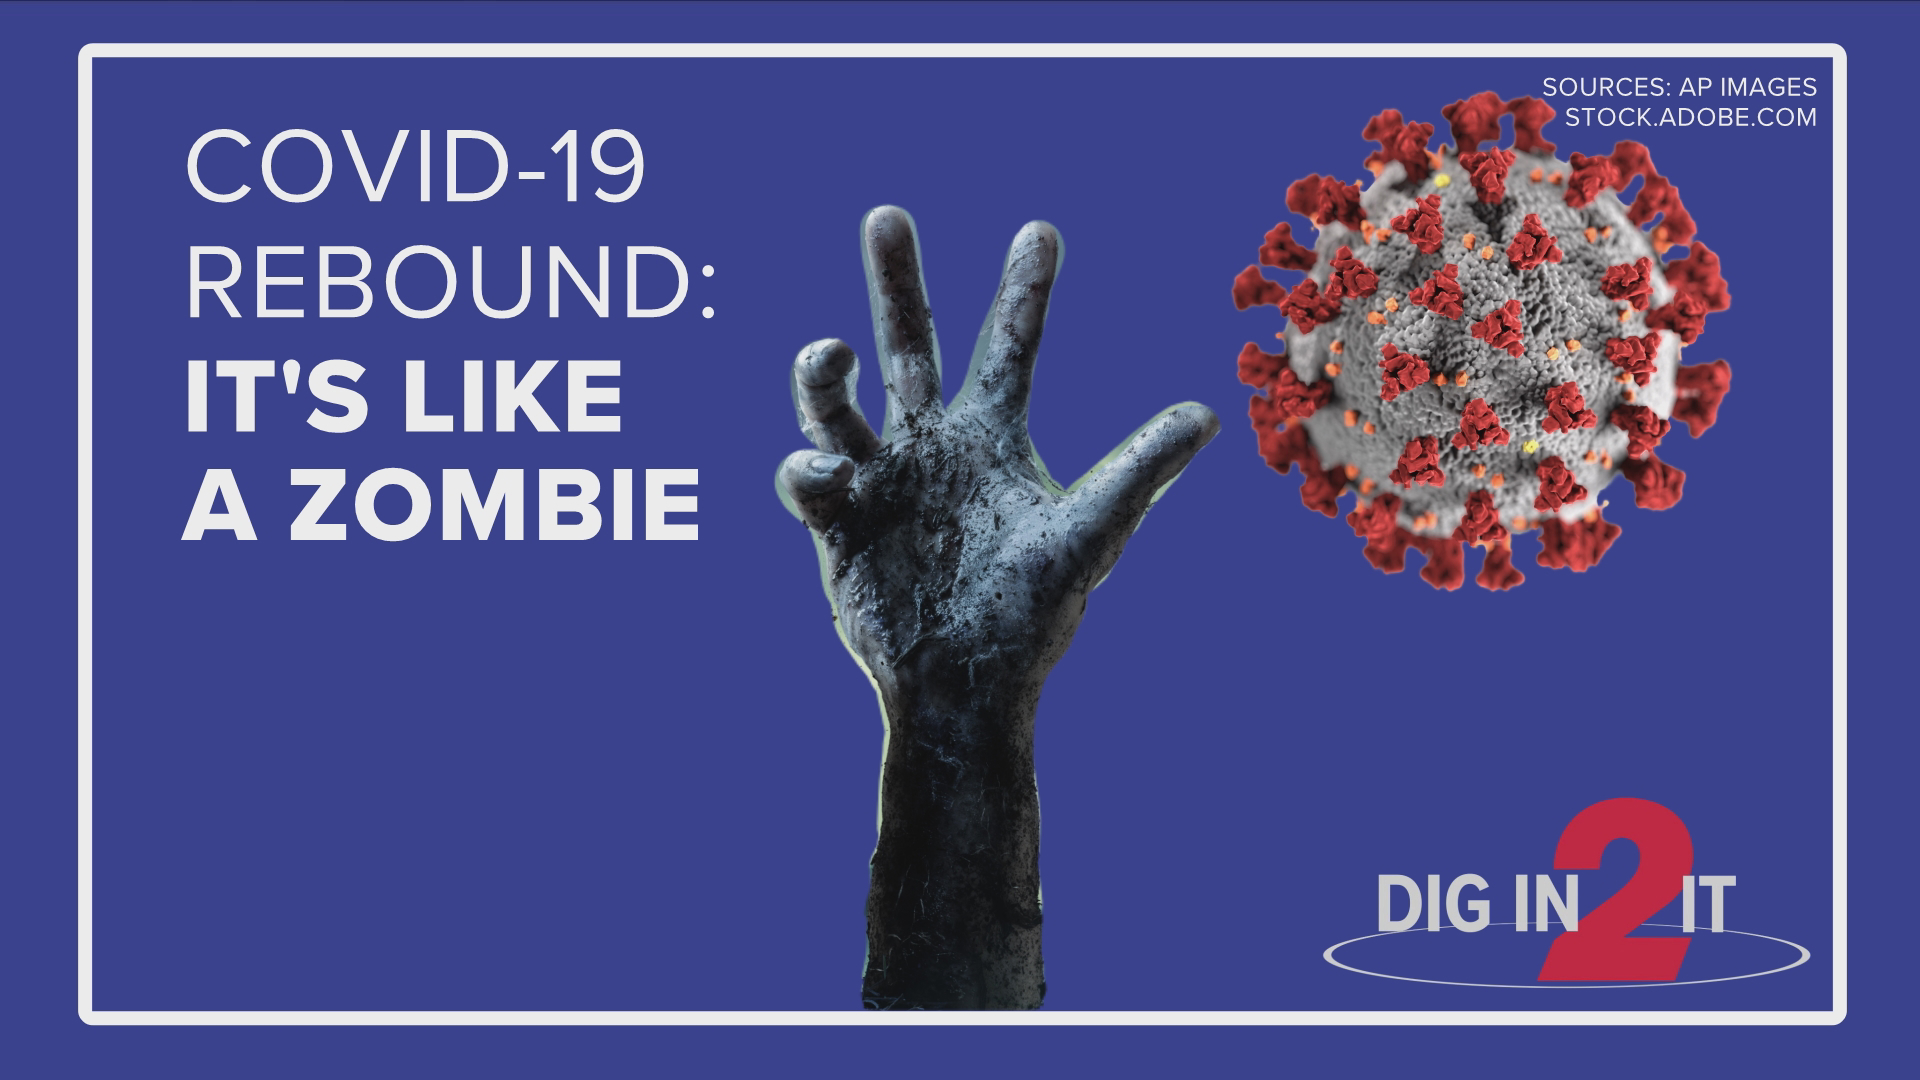 Rebound COVID-19 is like having a zombie virus. It comes back to life, making you feel sick shortly after you thought you were better.